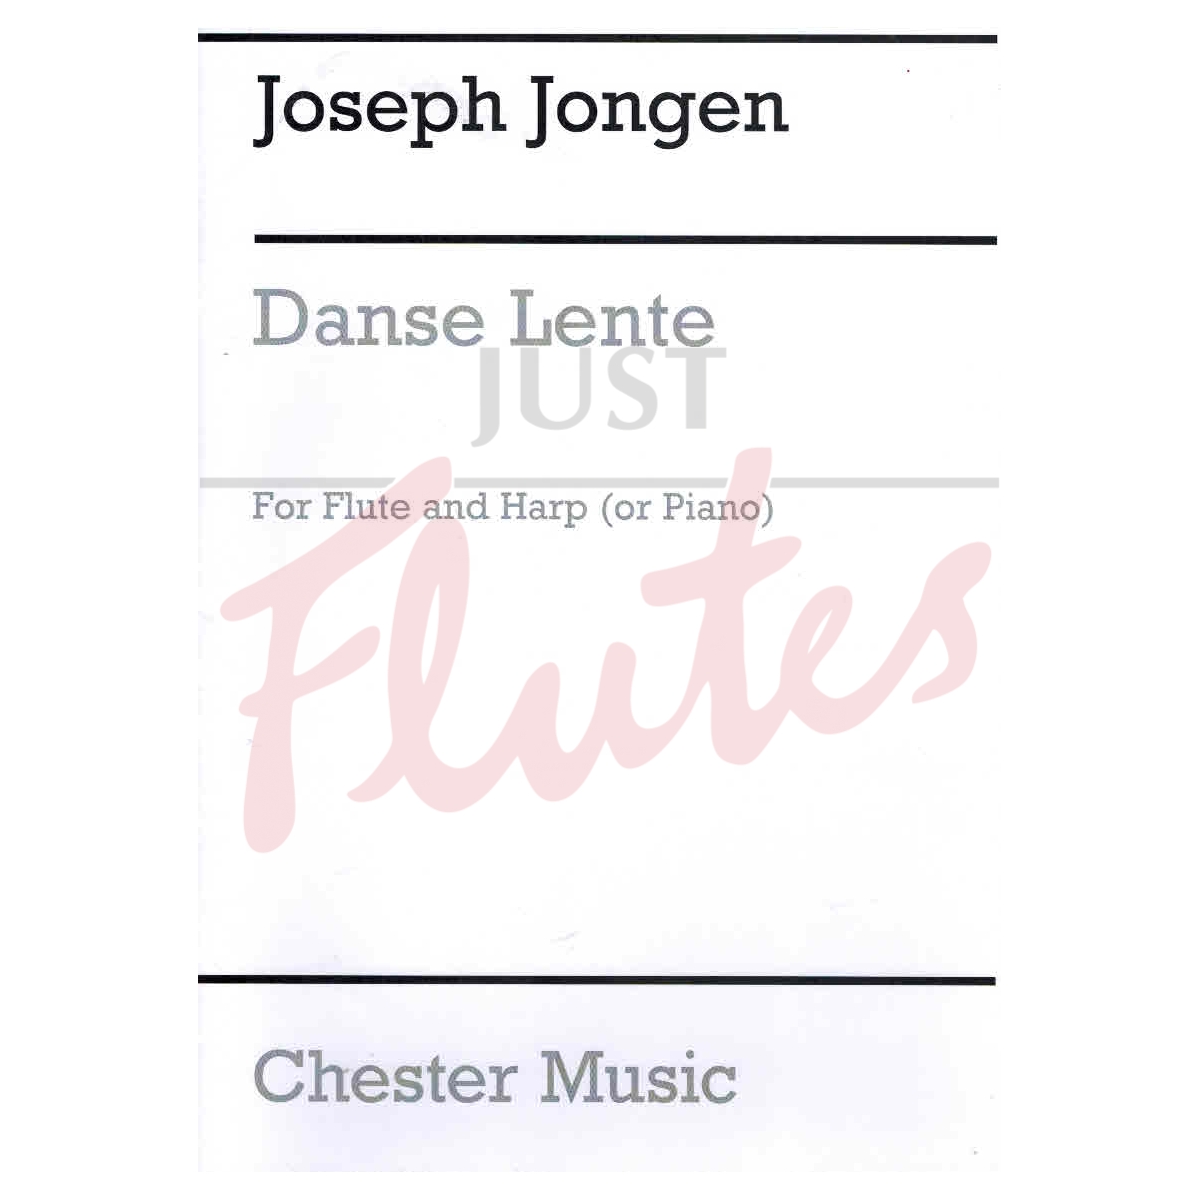 Danse Lente for Flute and Harp (or Piano)